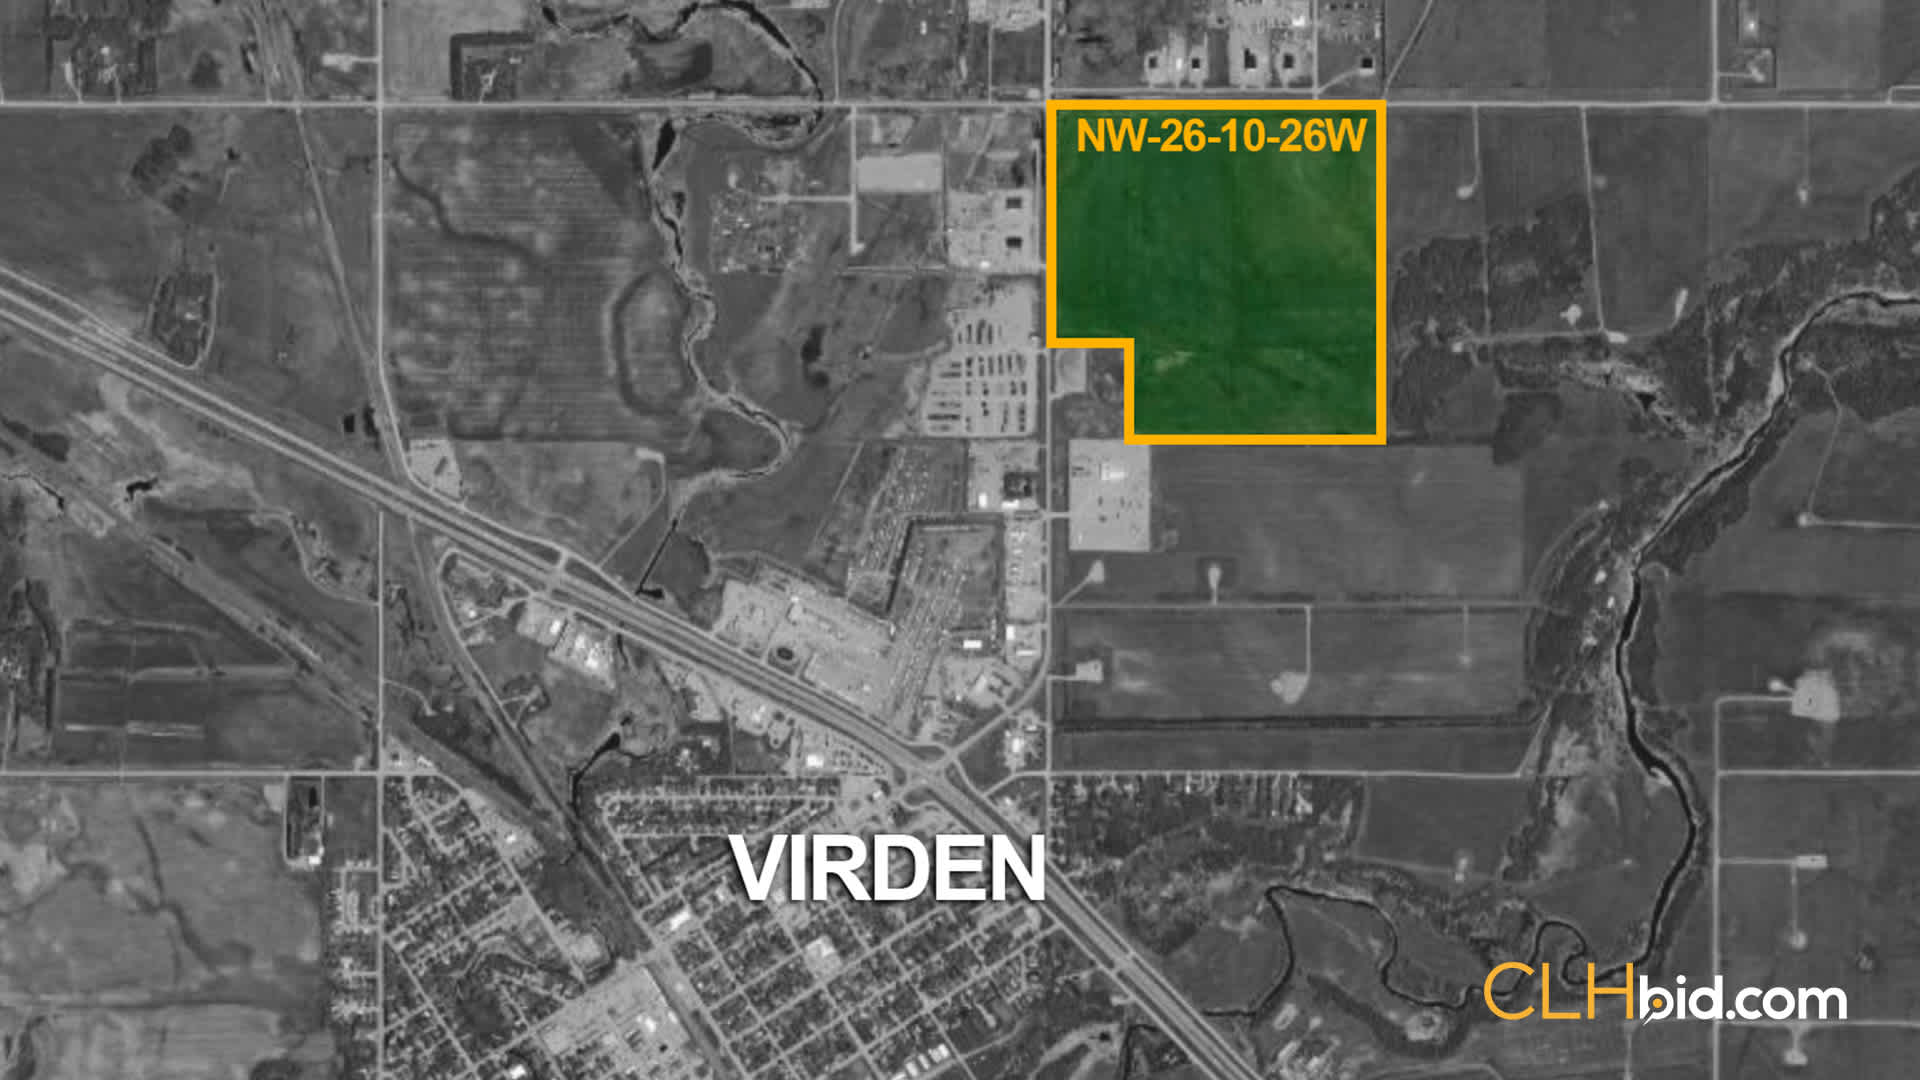 Map-Image-VELDHUIS-with-VIRDEN